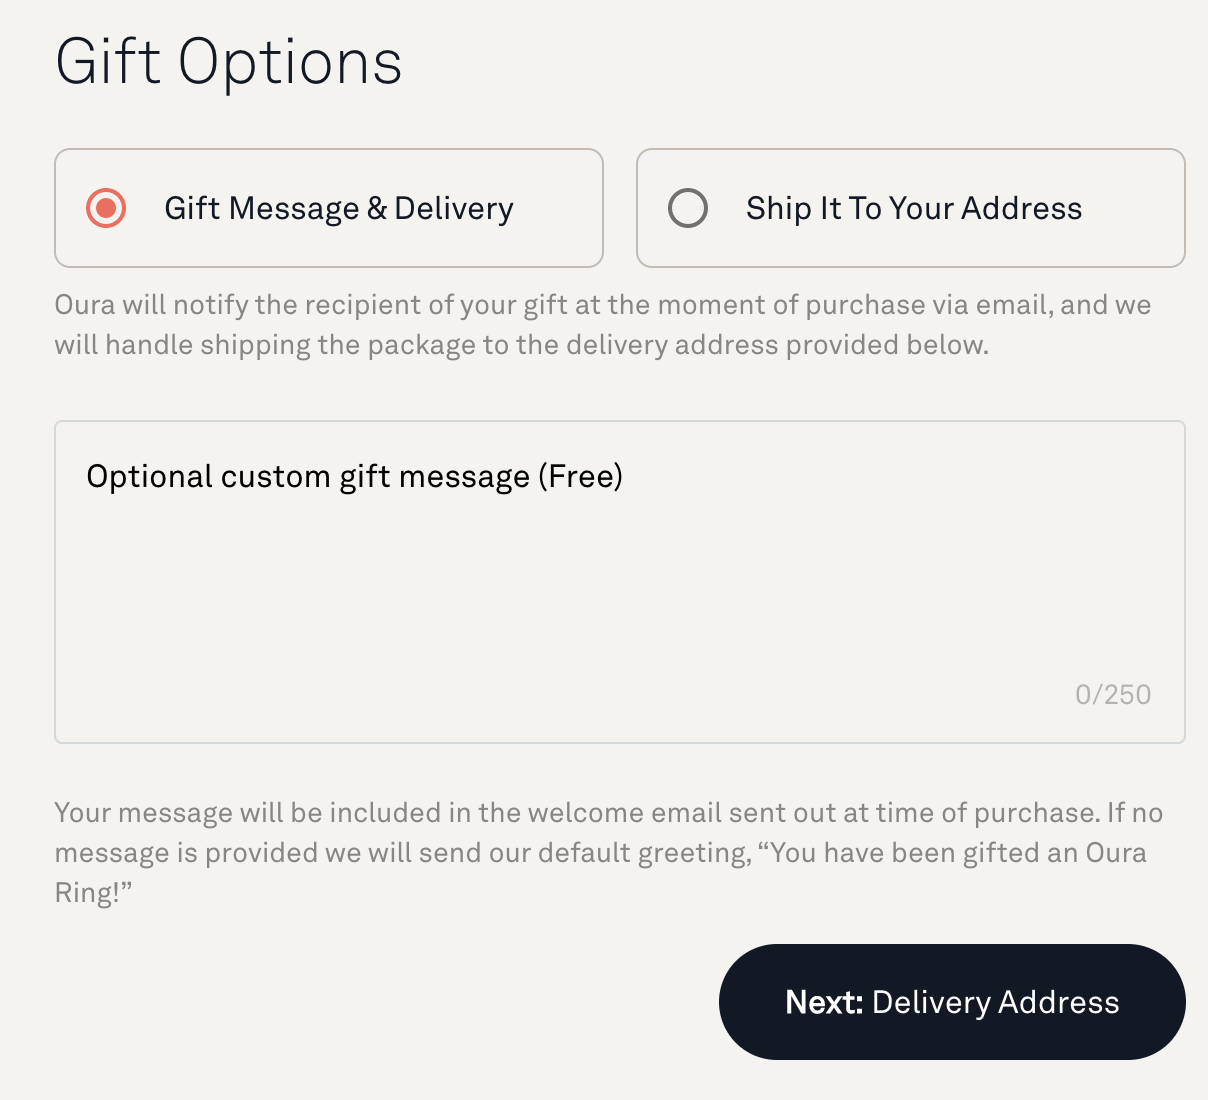 gift options screen with gift message and delivery selected